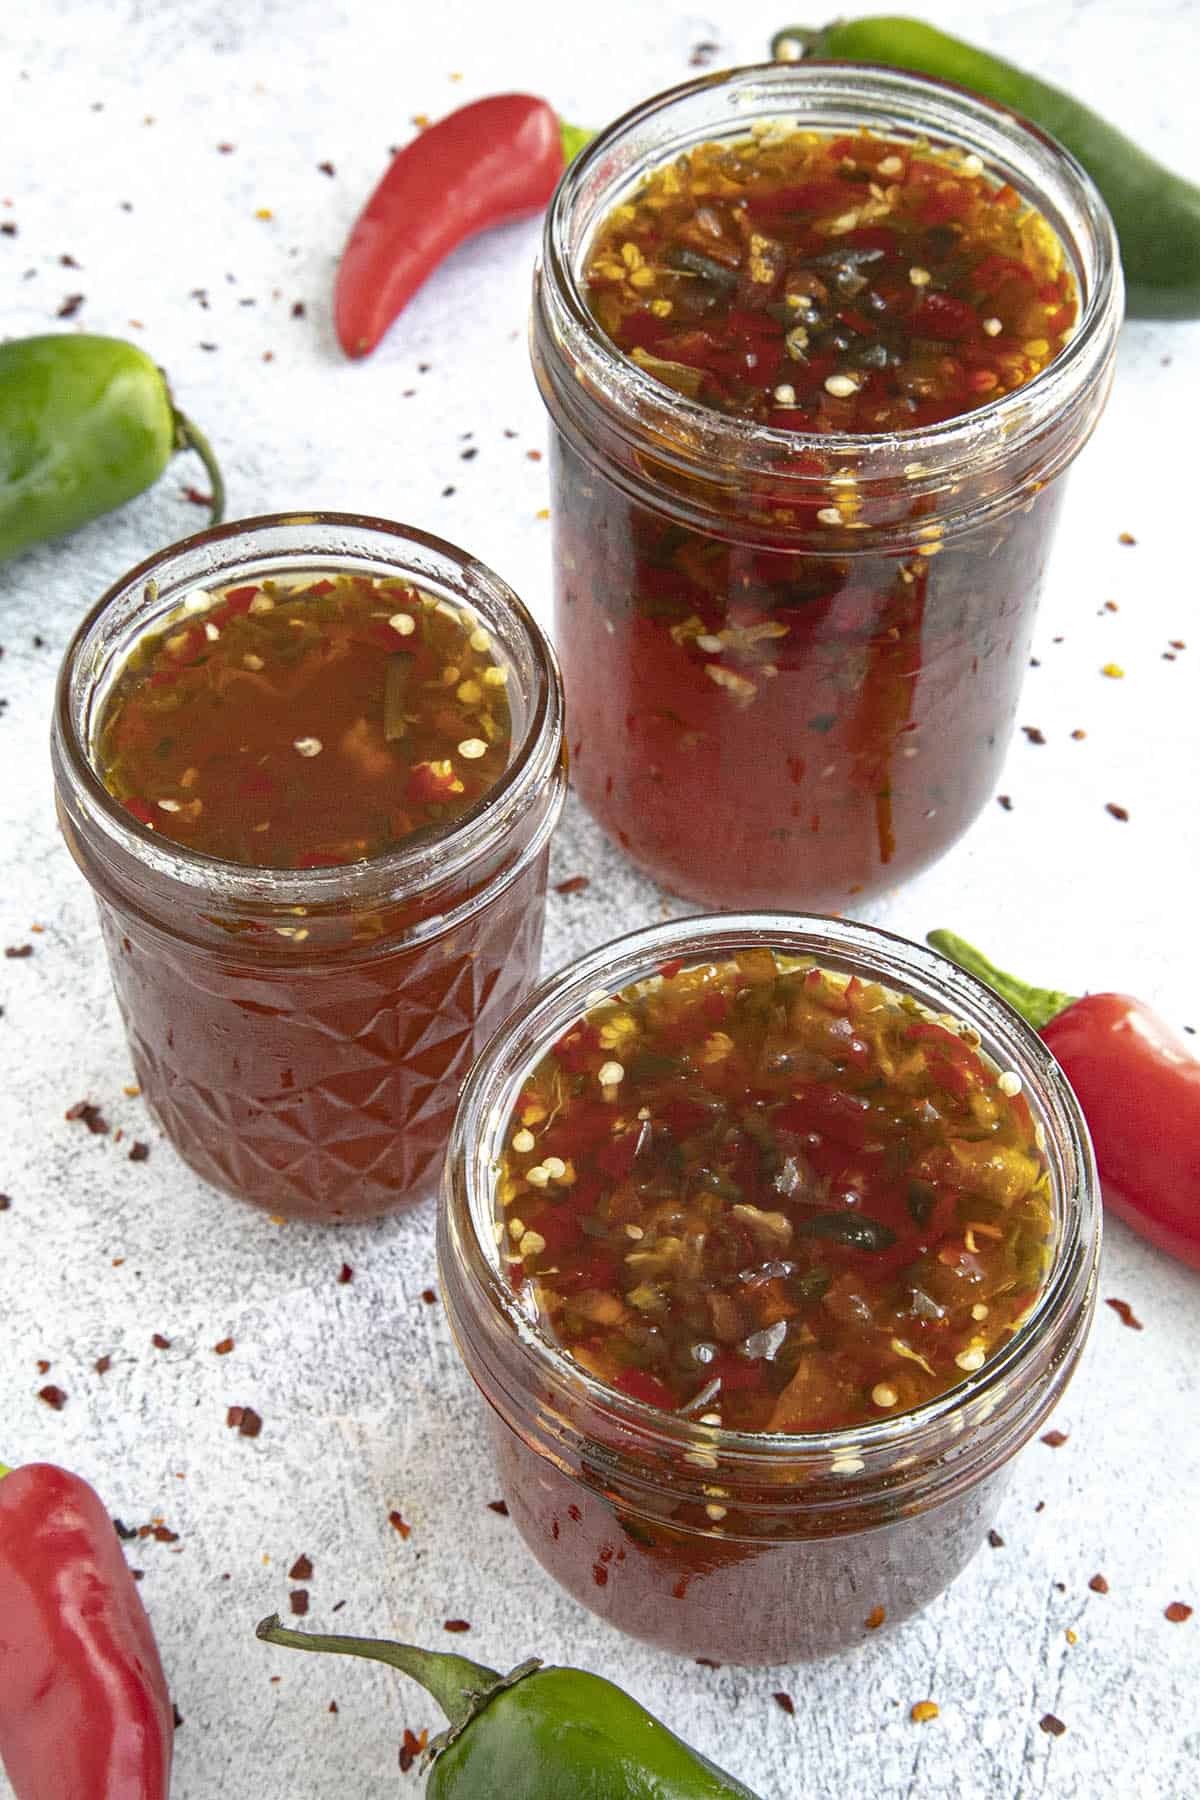 3 Jars of Spicy Pepper Jelly on a Table